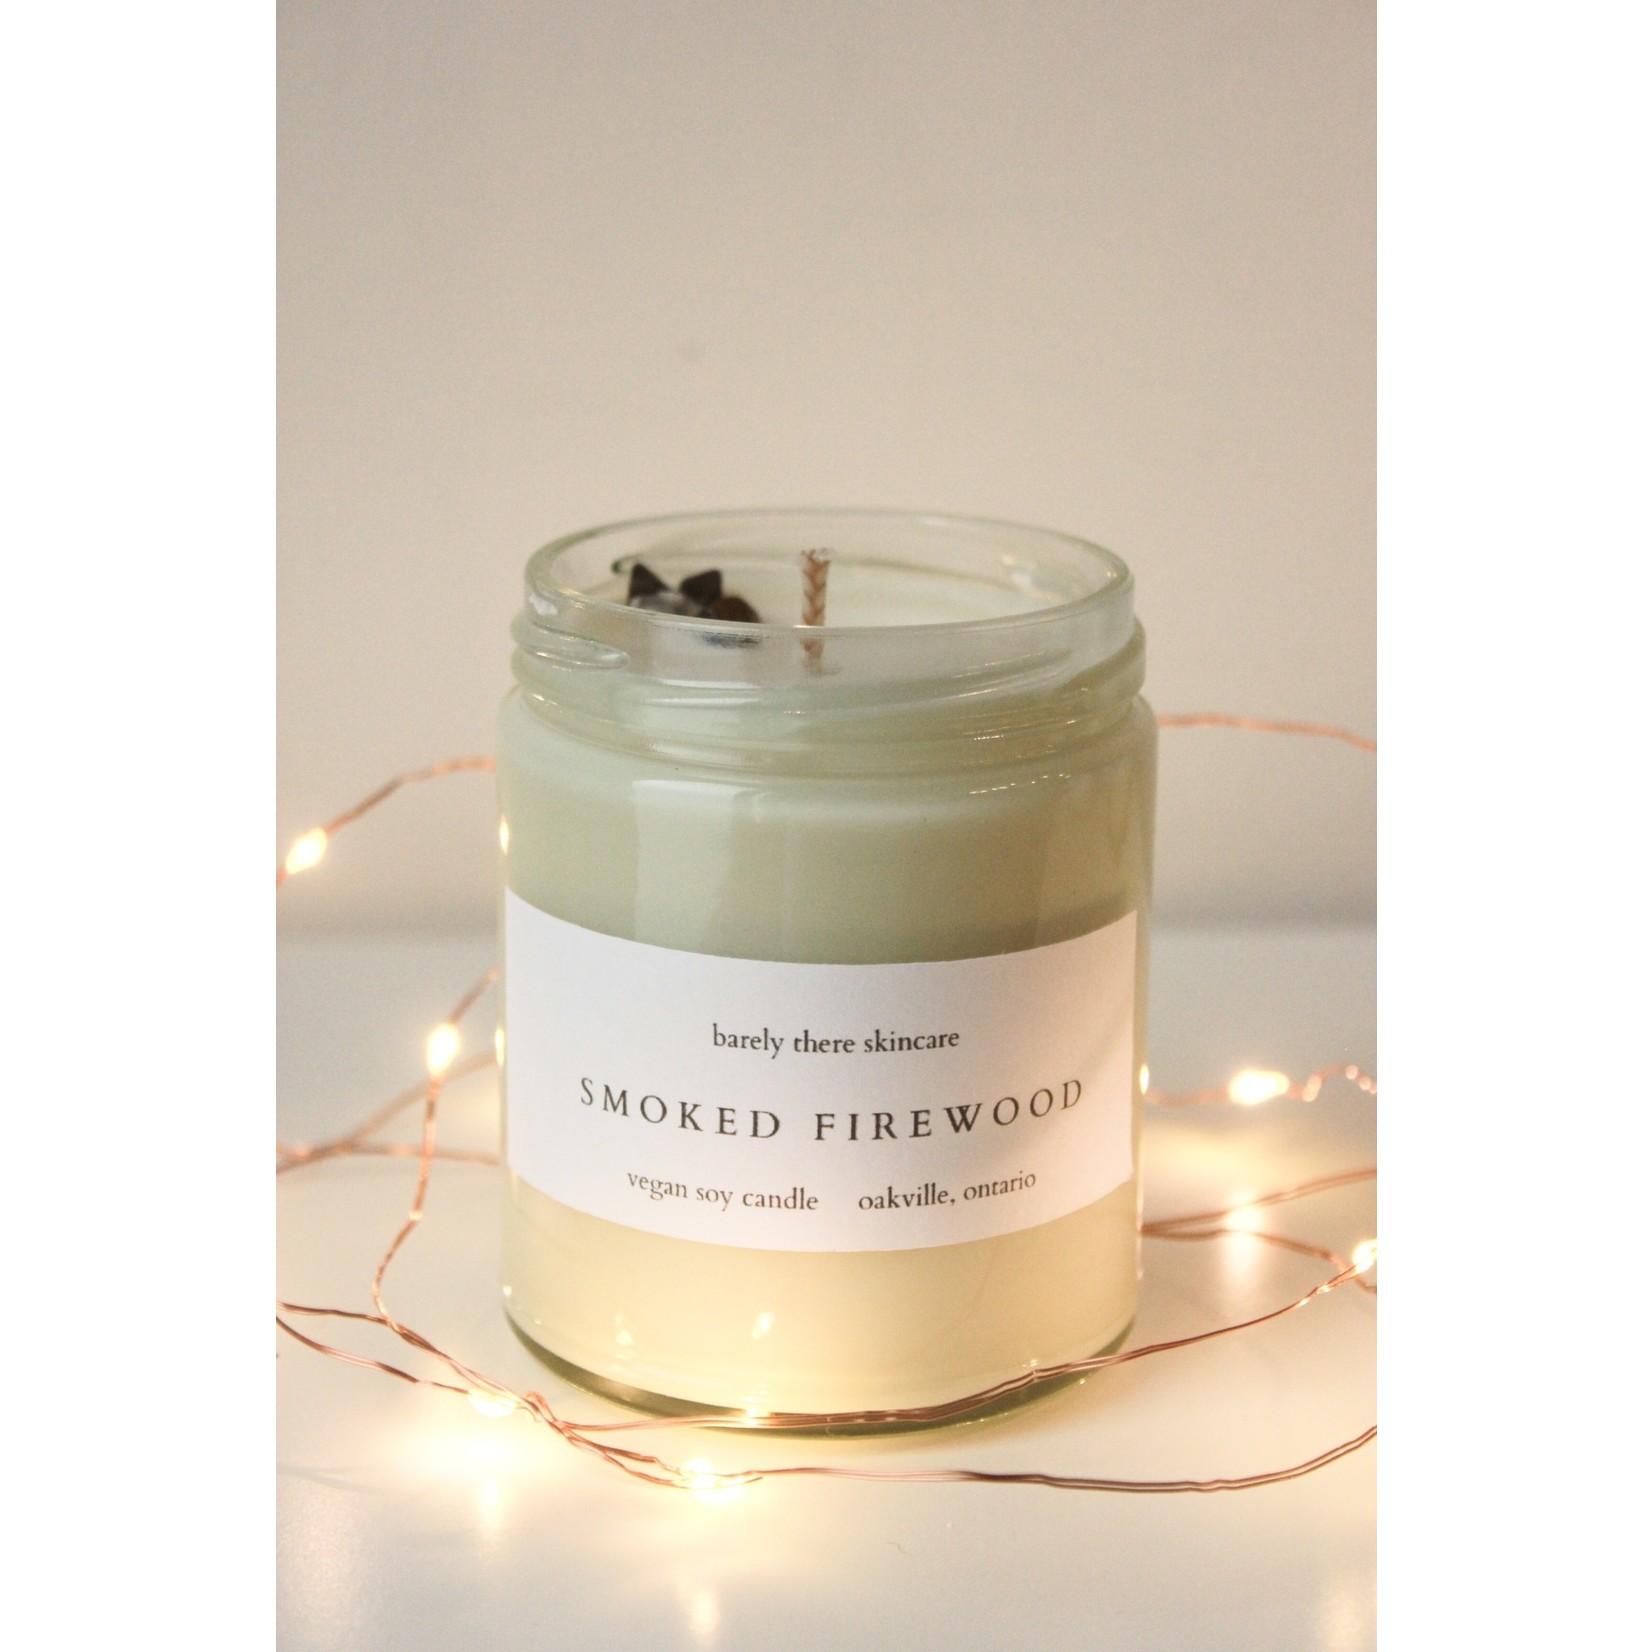 BARELY THERE SKINCARE BARELY THERE SMOKED FIREWOOD CANDLE